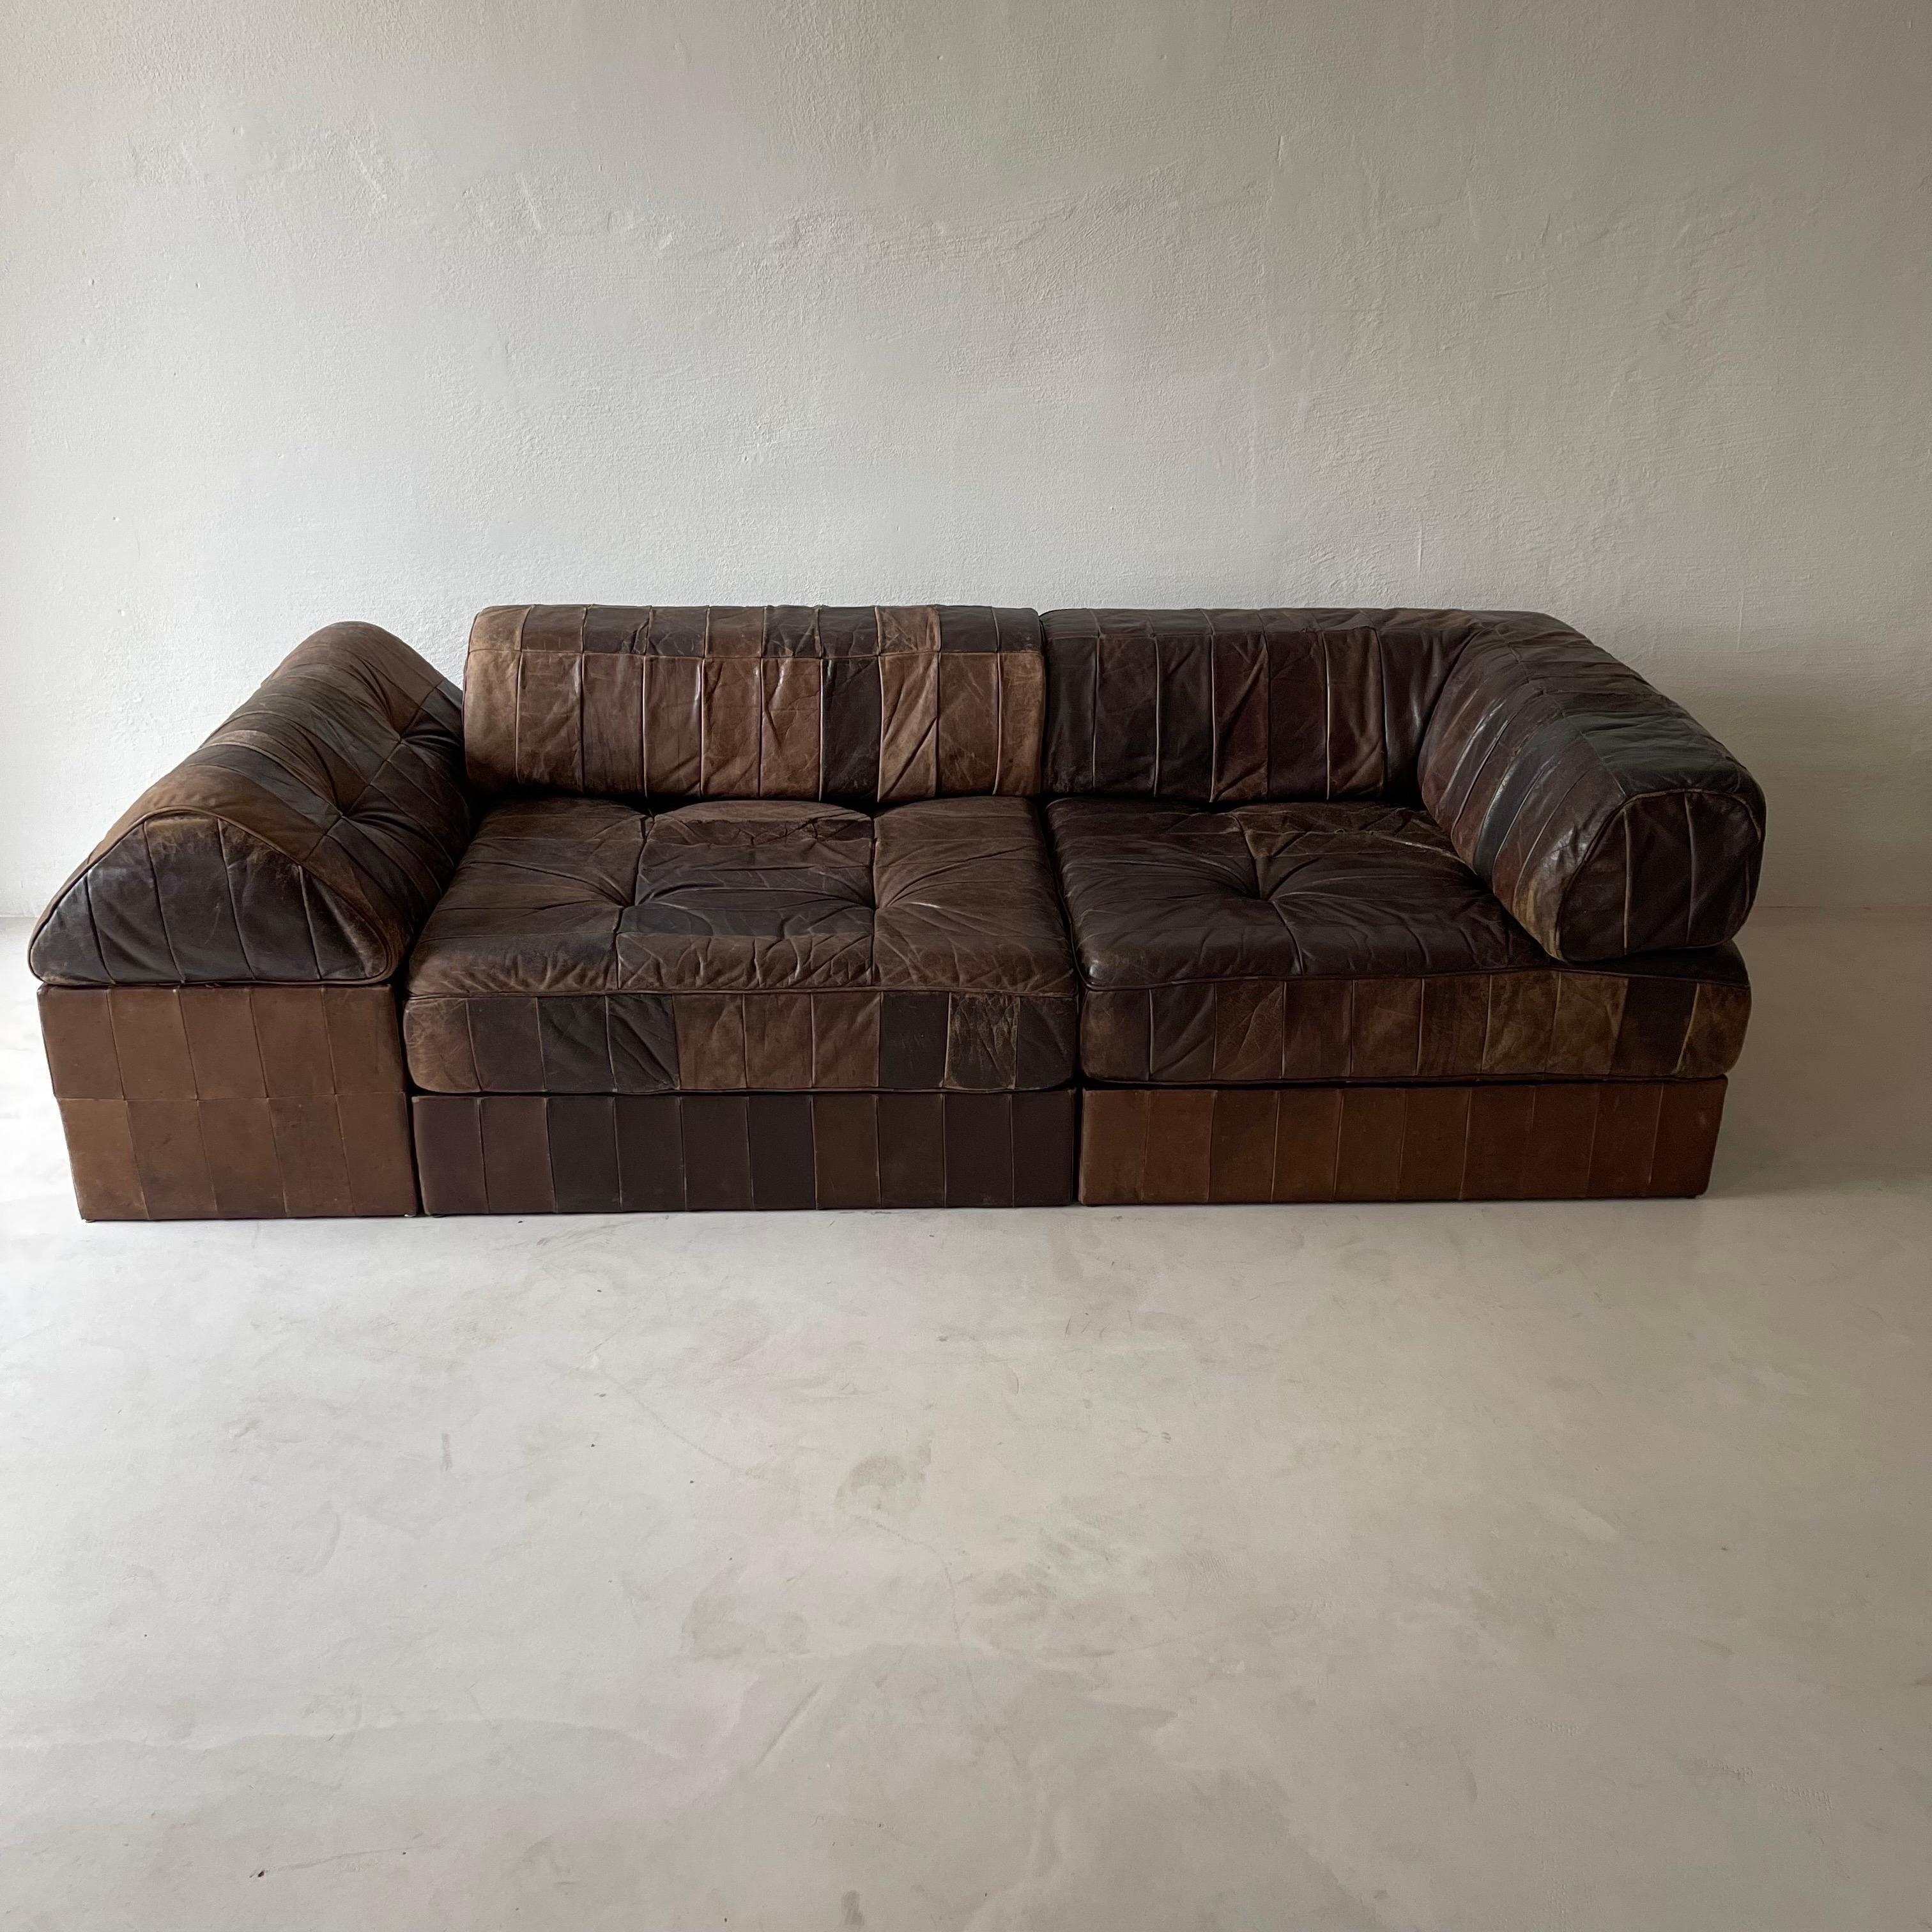 De Sede, 'DS-88' sectional sofa, leather, Switzerland, 1970s.

This fine patchwork leather sectional sofa designed by De Sede in the 1970s, and contains two regular seating elements and one storage compartment with a matching pillow. A truly